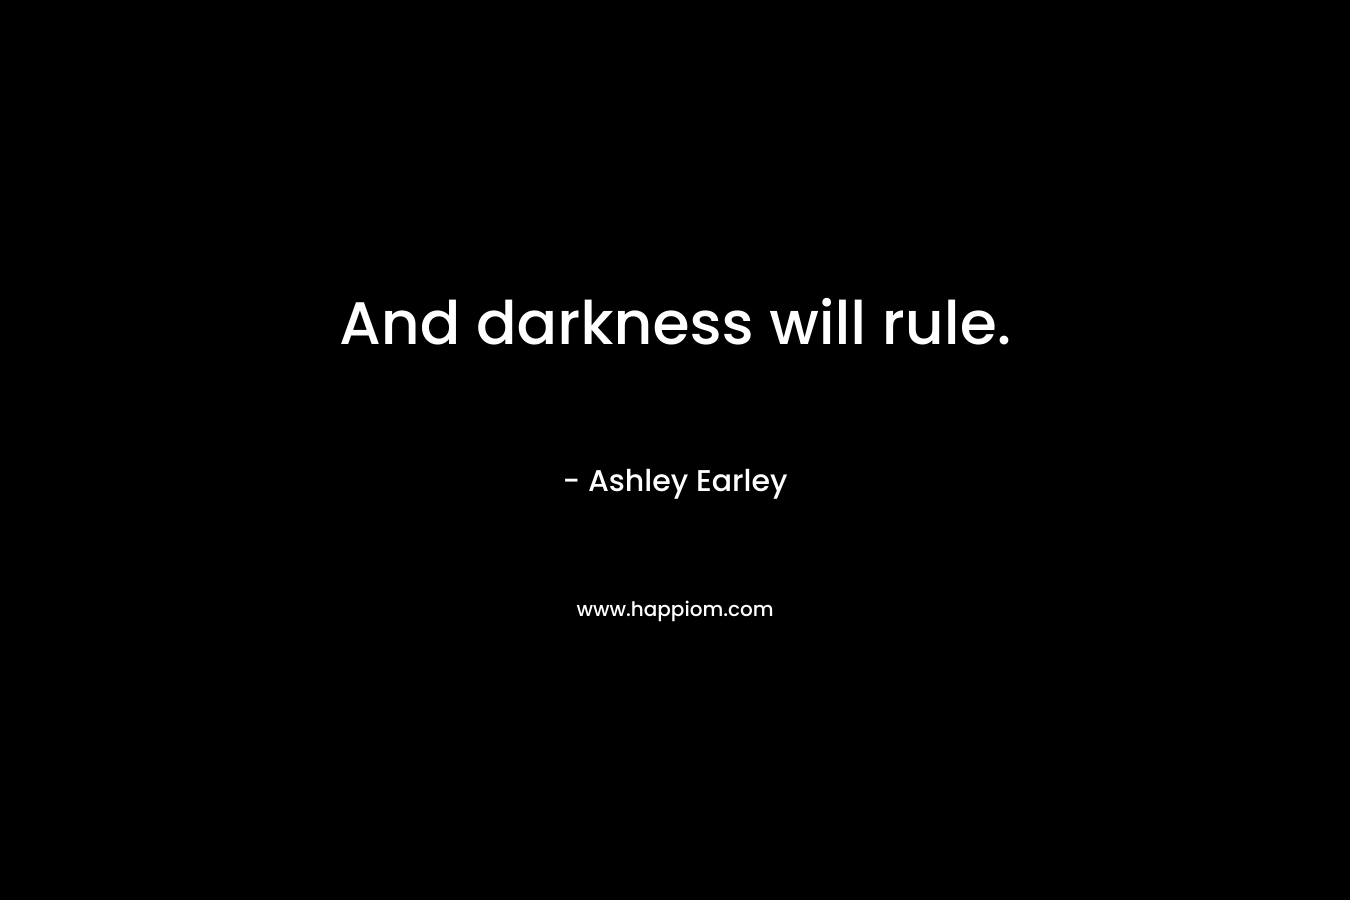 And darkness will rule.